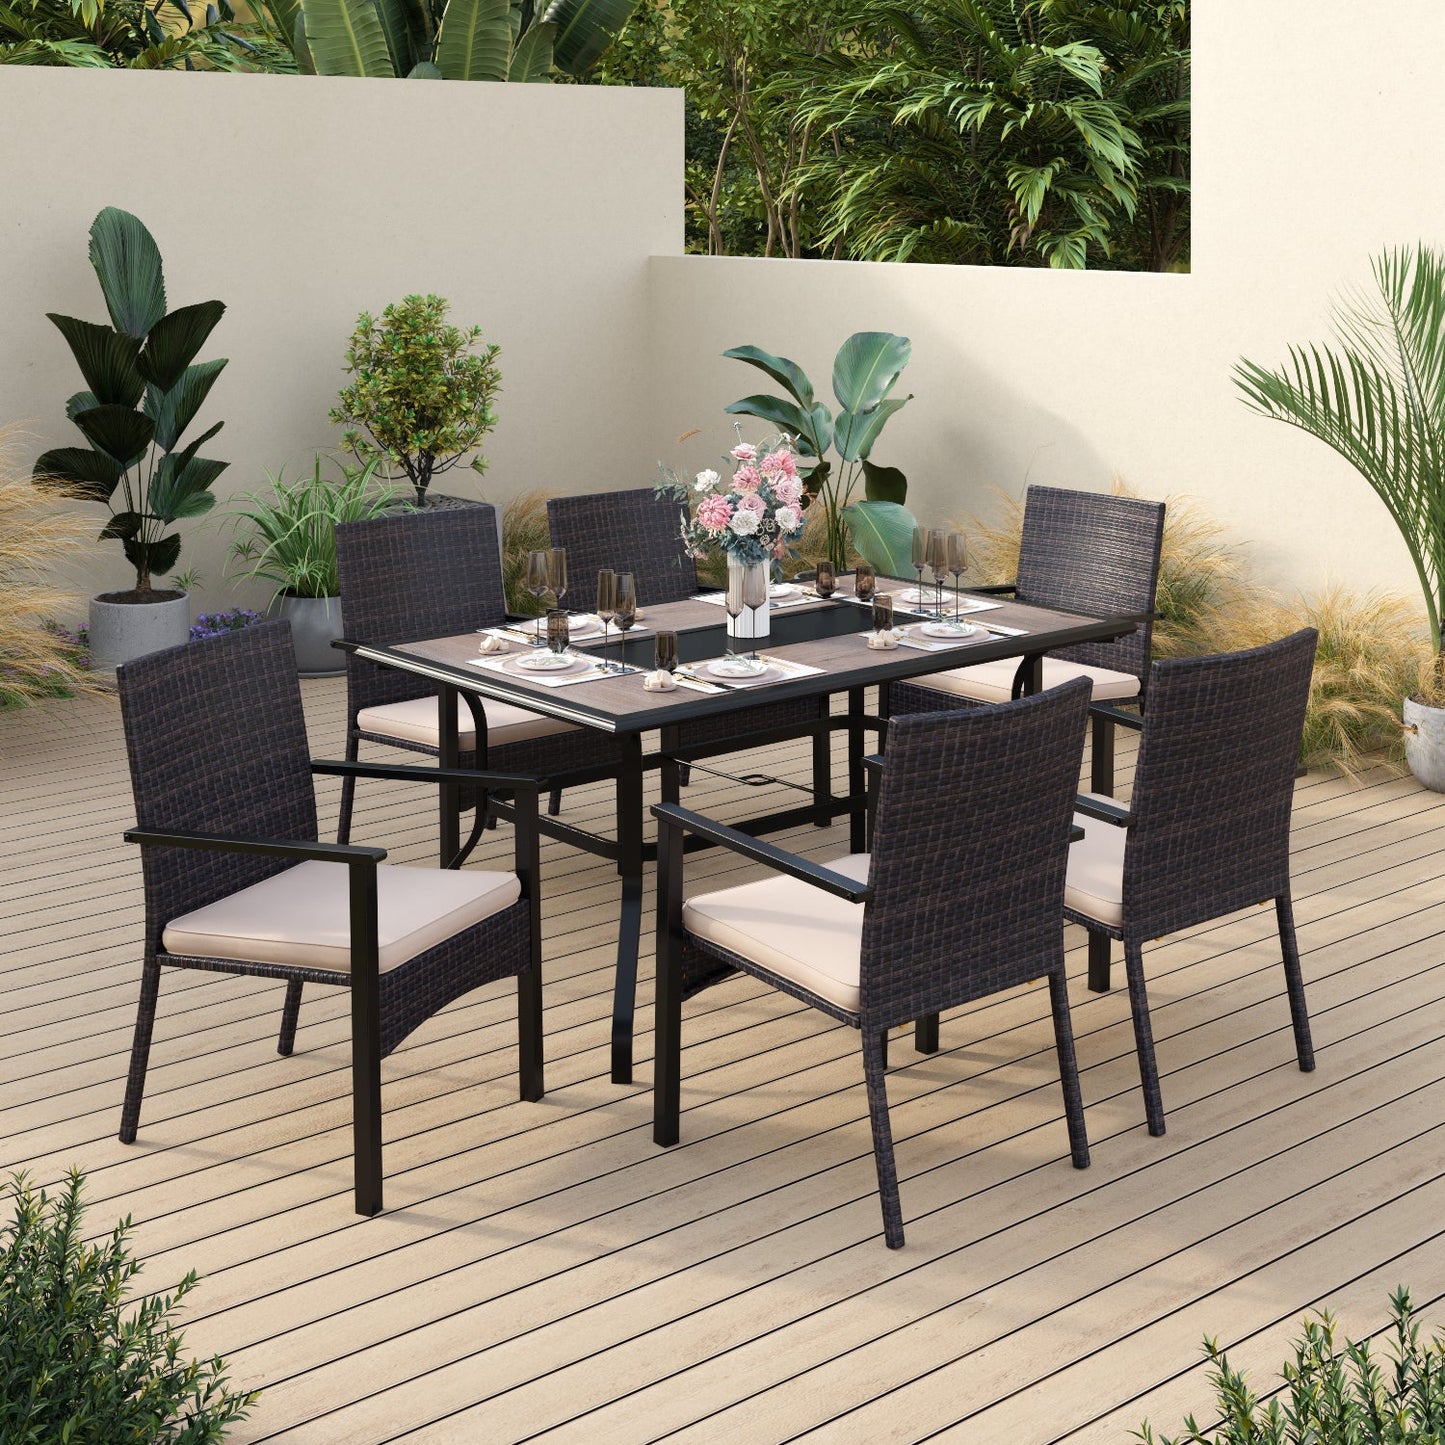 Sophia & William 7 Pieces Outdoor Patio Dining Set Dining Chairs and Square Metal Dining Table